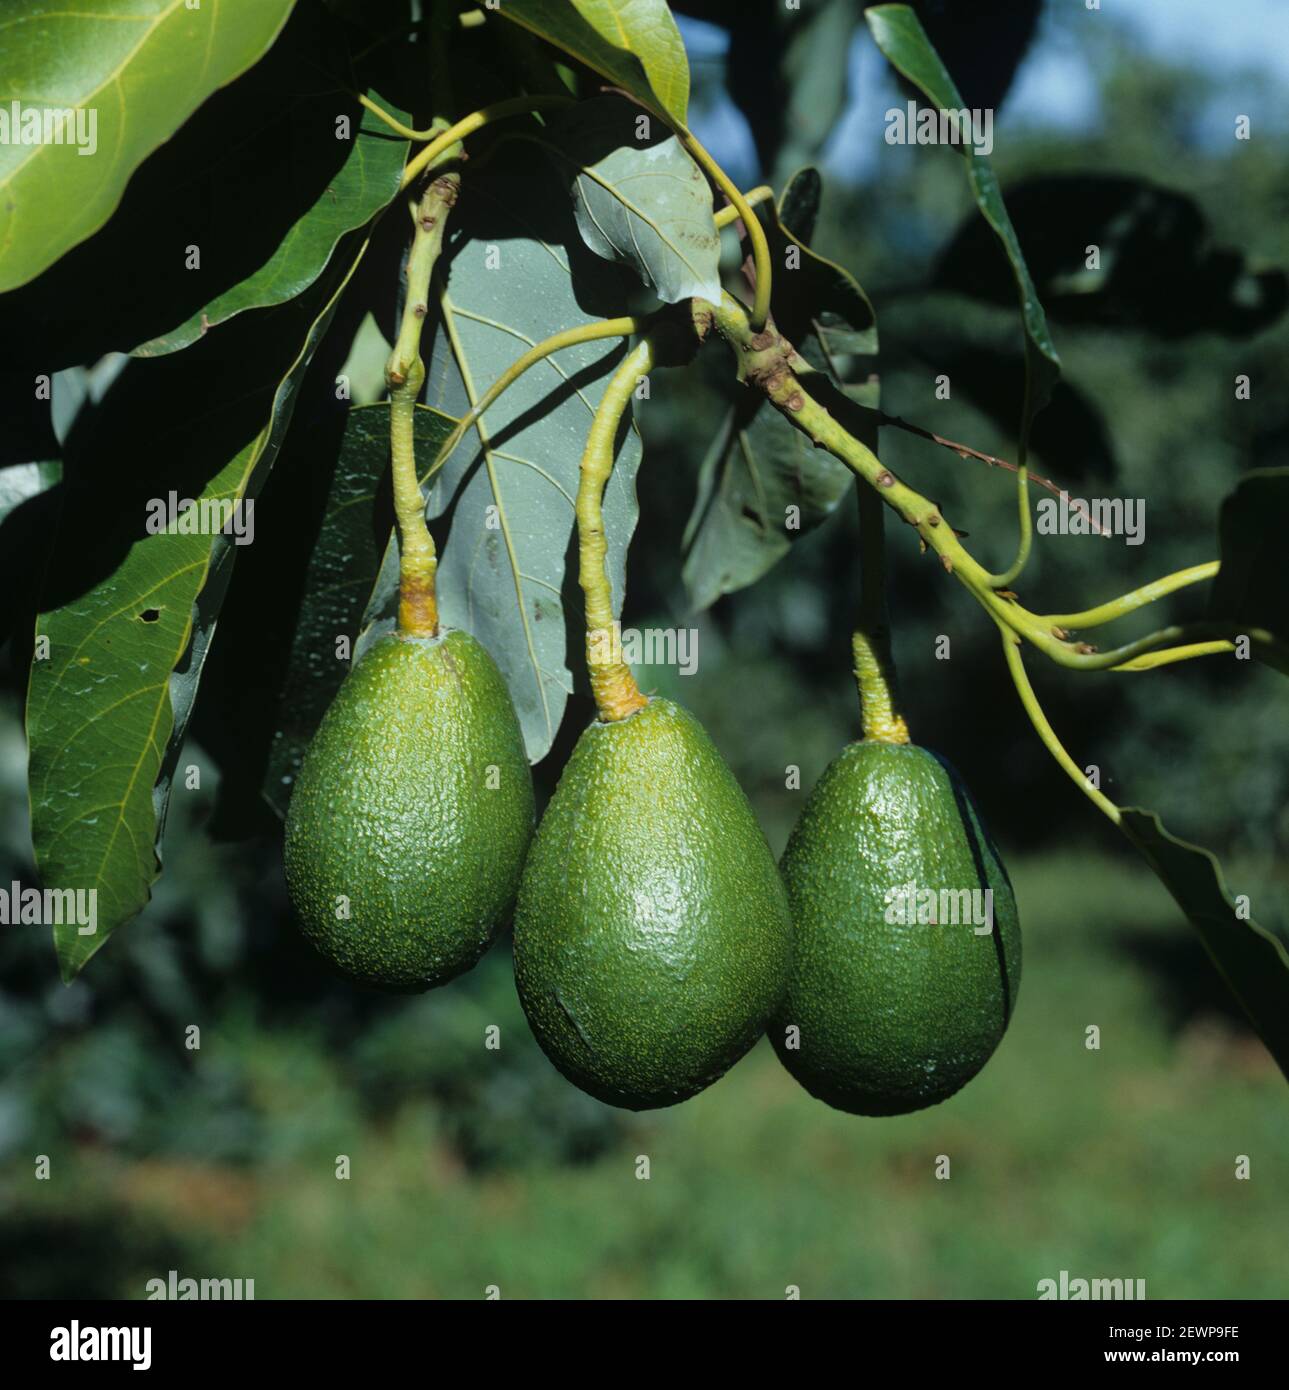 Maturing avocado fruit (Persea americana) hanging from long peduncles on the tree, Transvaal, South Africa, February Stock Photo